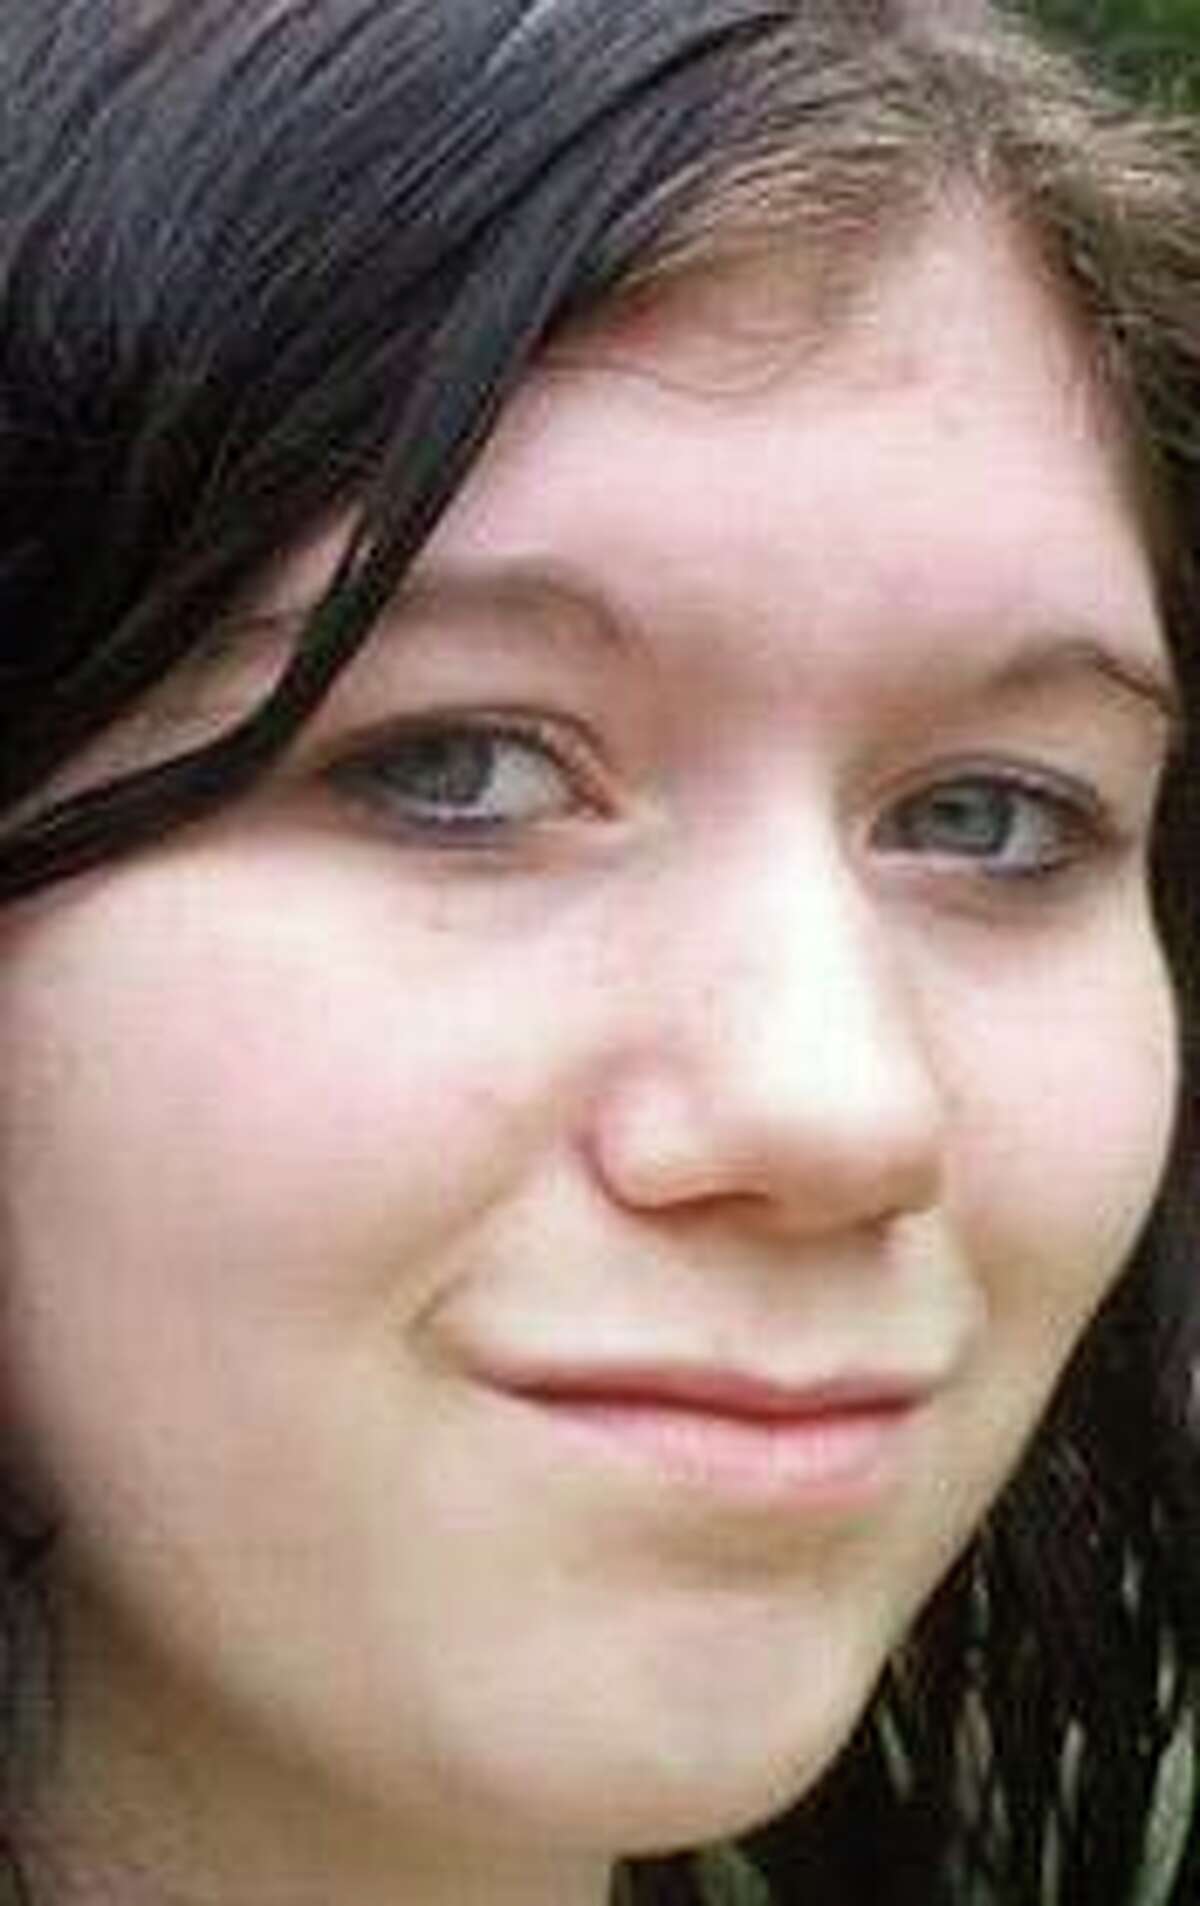 Alexandria “Ali” Lowitzer of Spring, has been missing since 2010. She was 16 when she went missing.